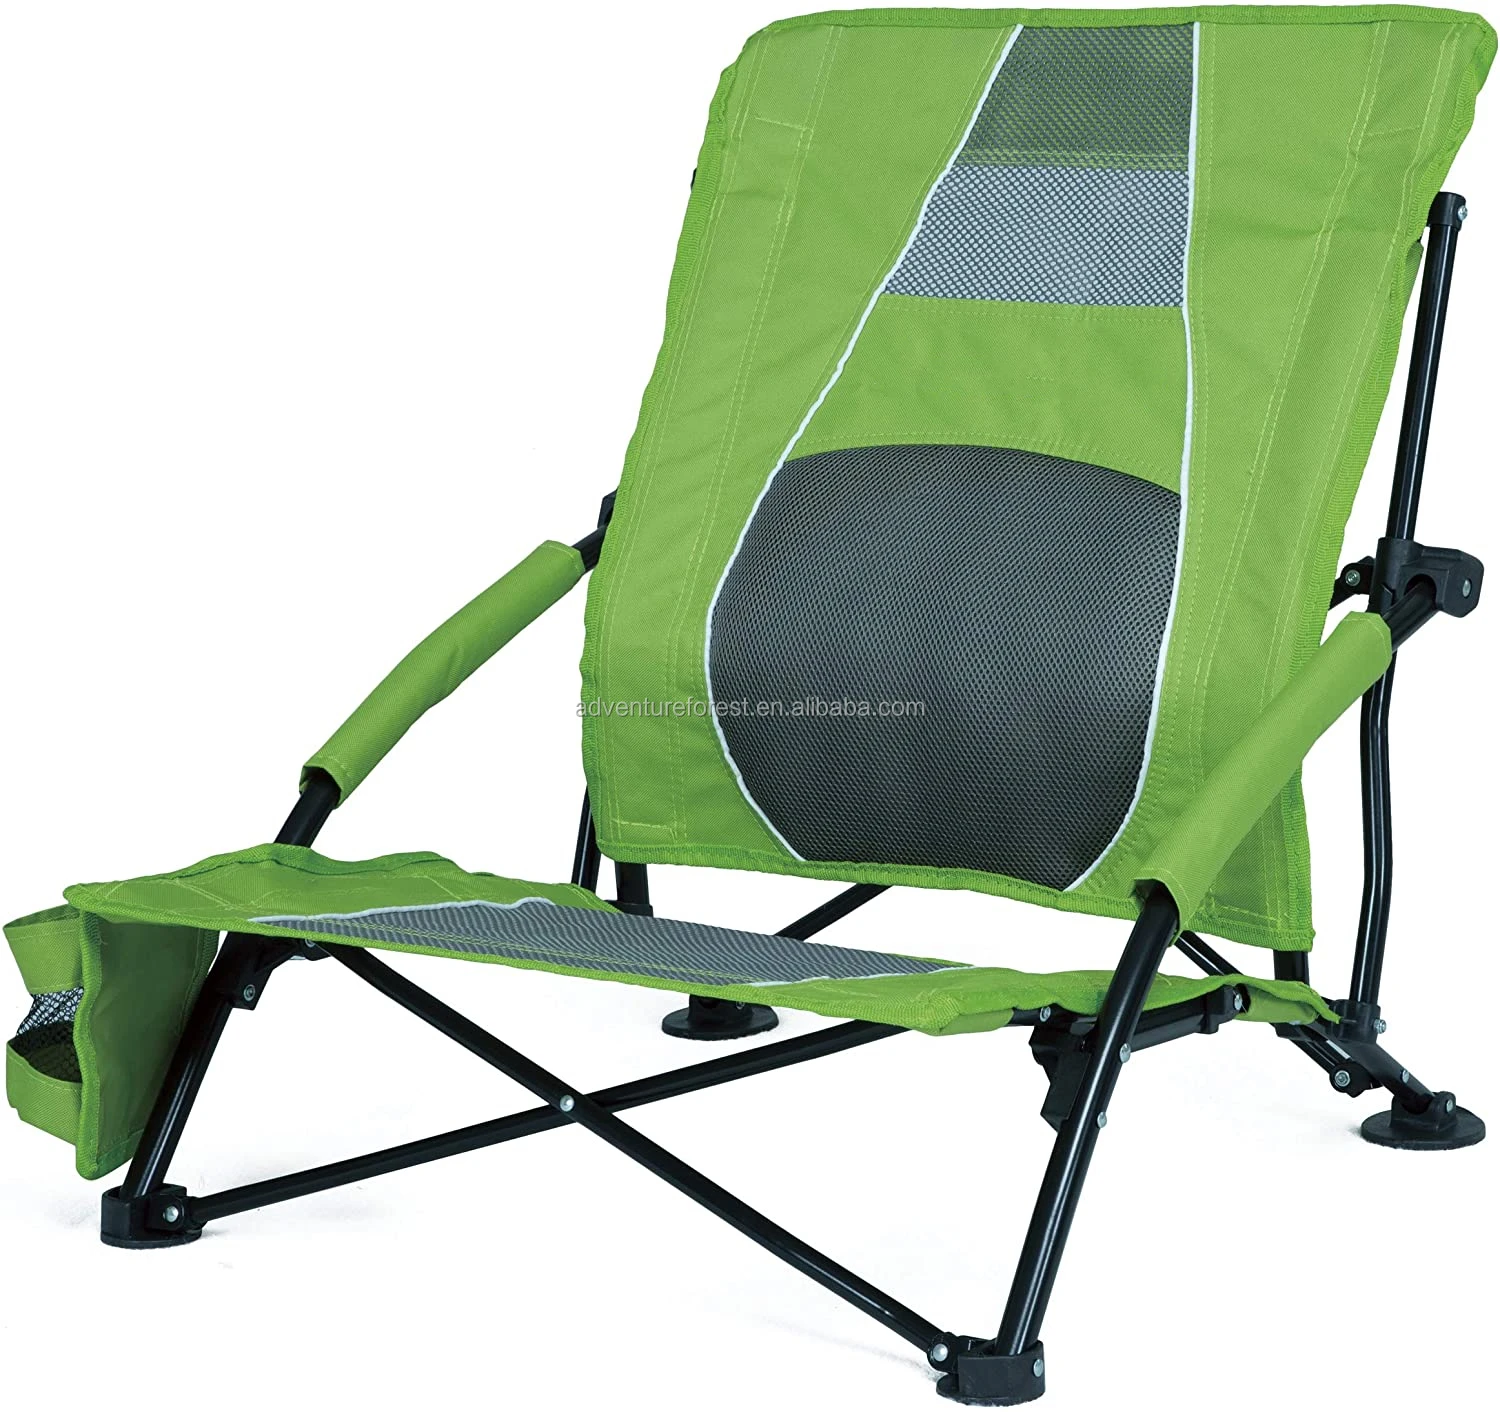 Low Gravity Beach Chair Heavy Duty Portable Camping And Lounge Travel Outdoor Seat Buy Theater Seating Chairs Outdoor Folding Chair Camping Folding Beach Chair Product On Alibaba Com